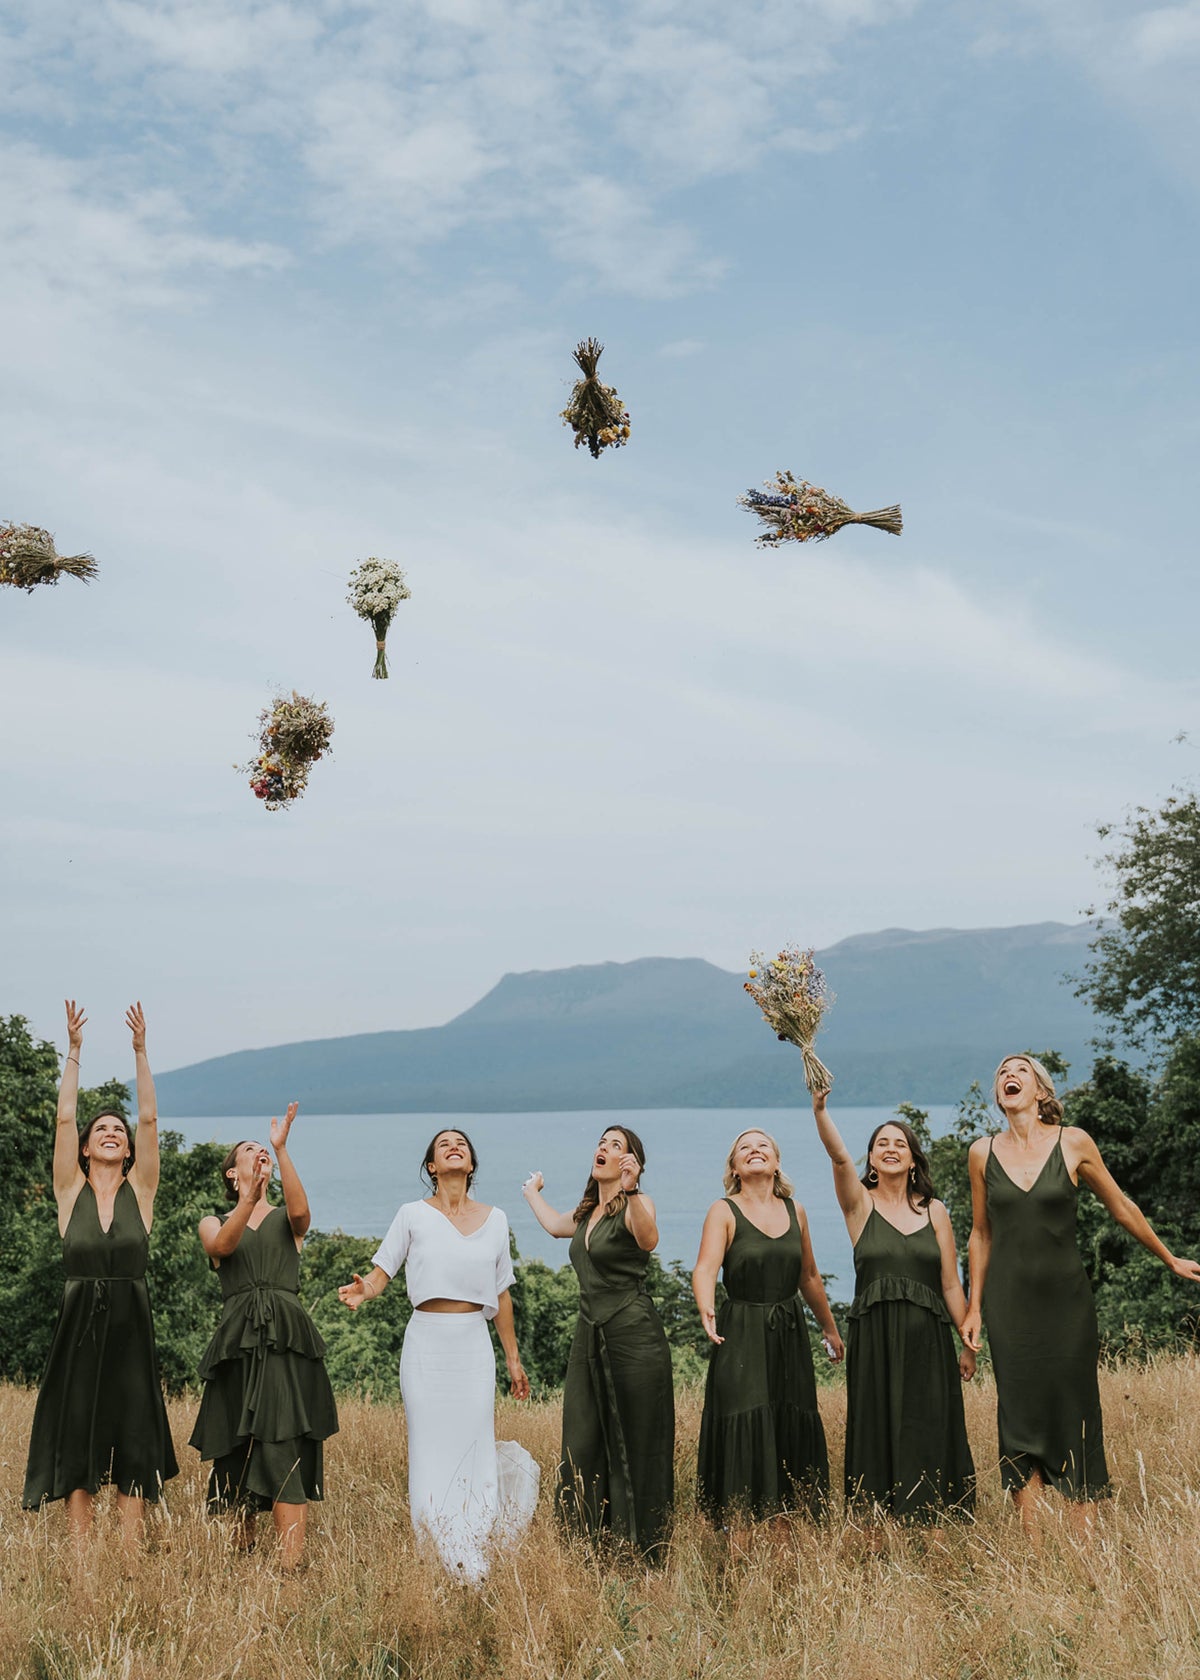 BRIDAL-PARTY-THROWING-BOUQUETS-IN-TUSSOCK-GRASS